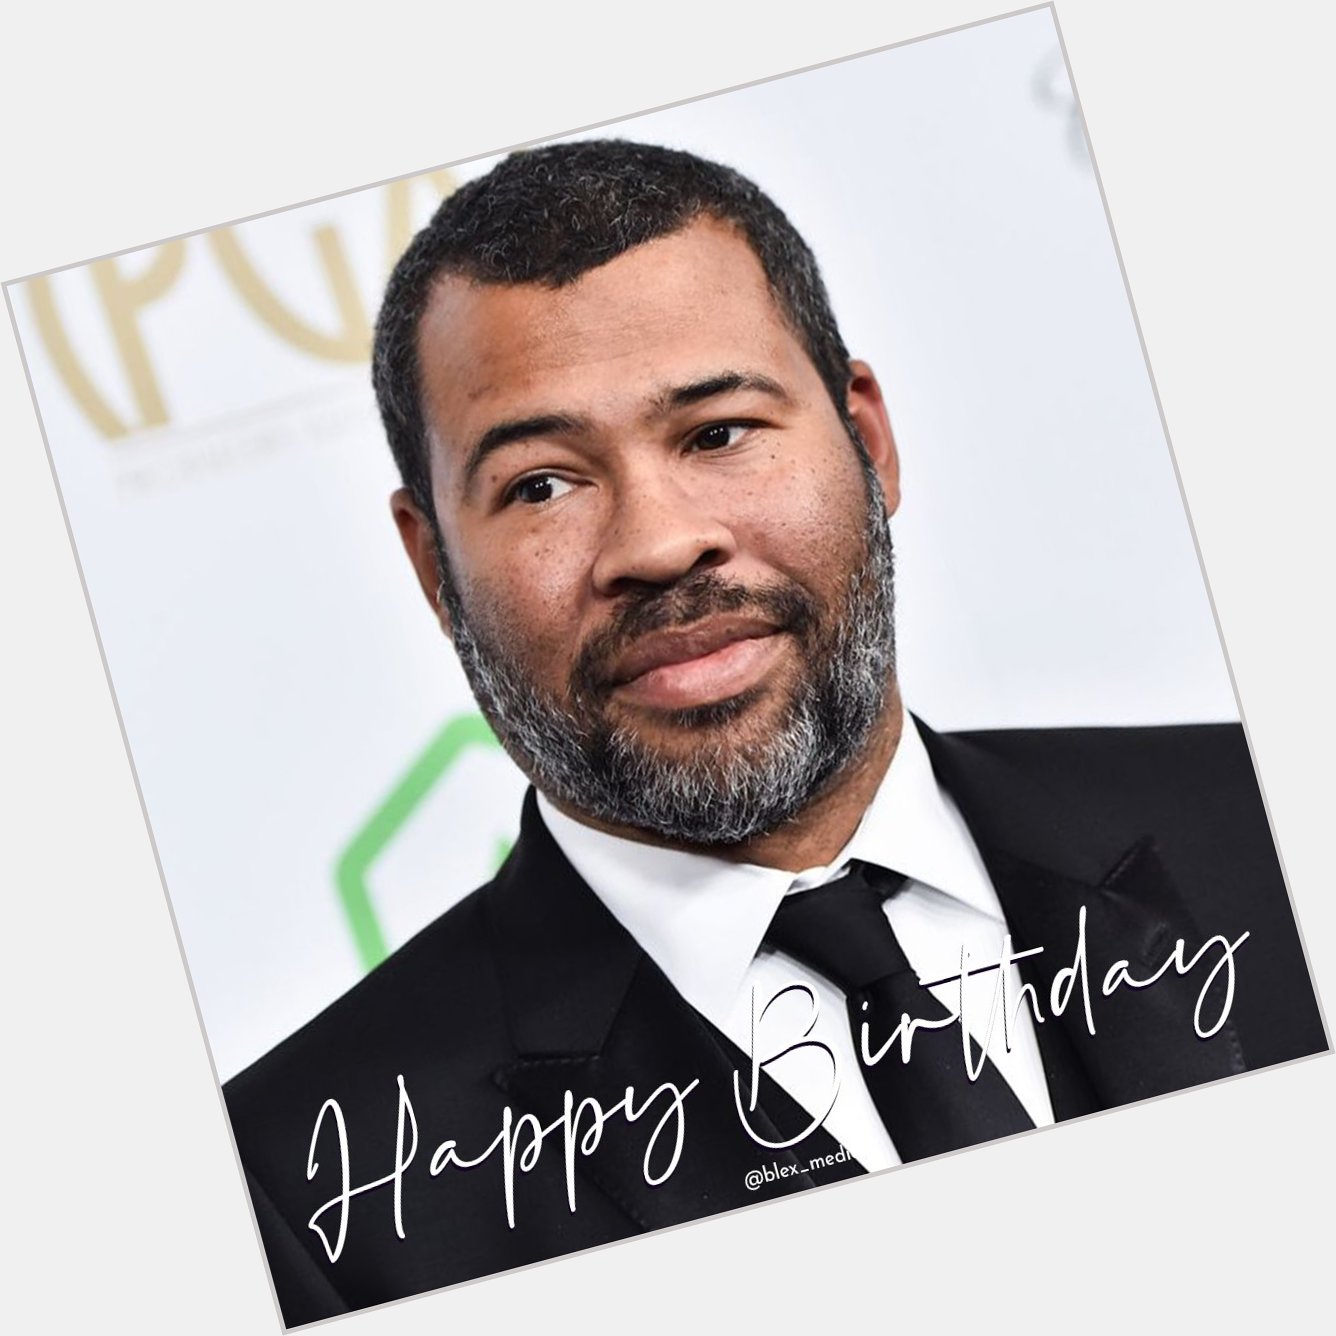 Happy Birthday, Jordan Peele! Between \Get Out\ and \Us,\ which is your favorite? 